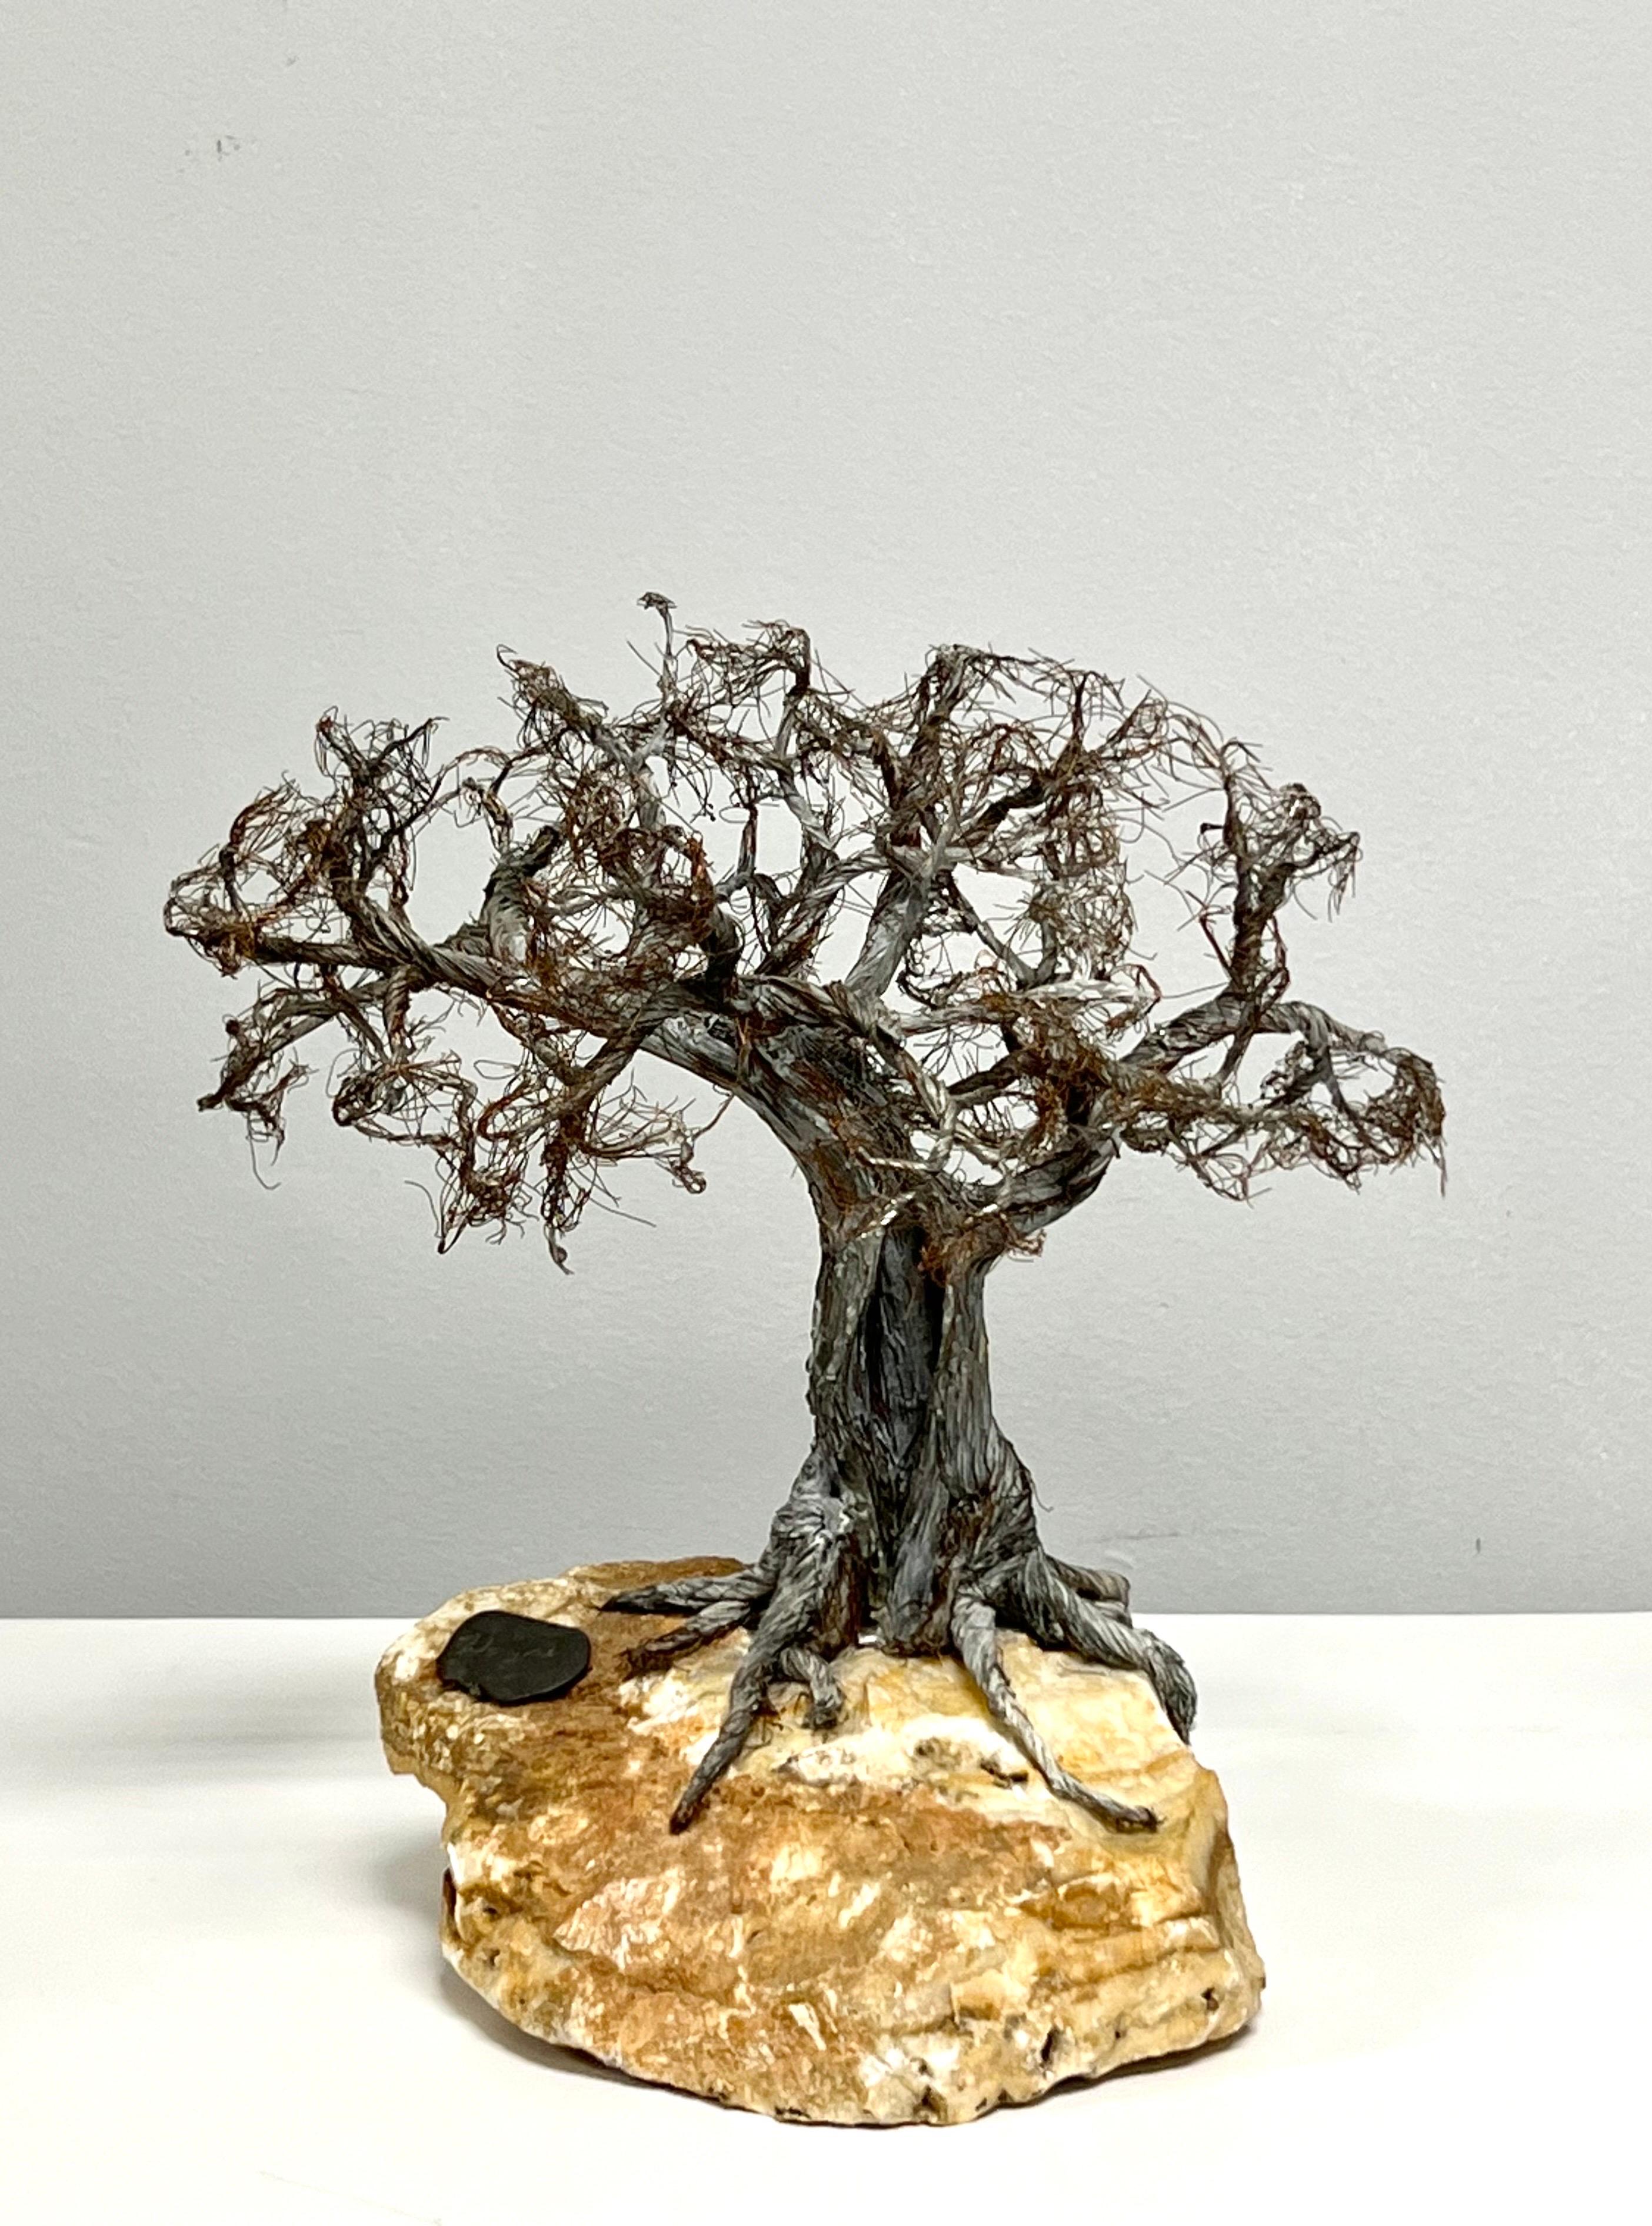 Art Sculpture
Sculptural Raw Edge Botanical Art Bonsai Tree
On a raw edge stone base. Signed on bronze plaque.
Preowned unrestored original vintage condition.